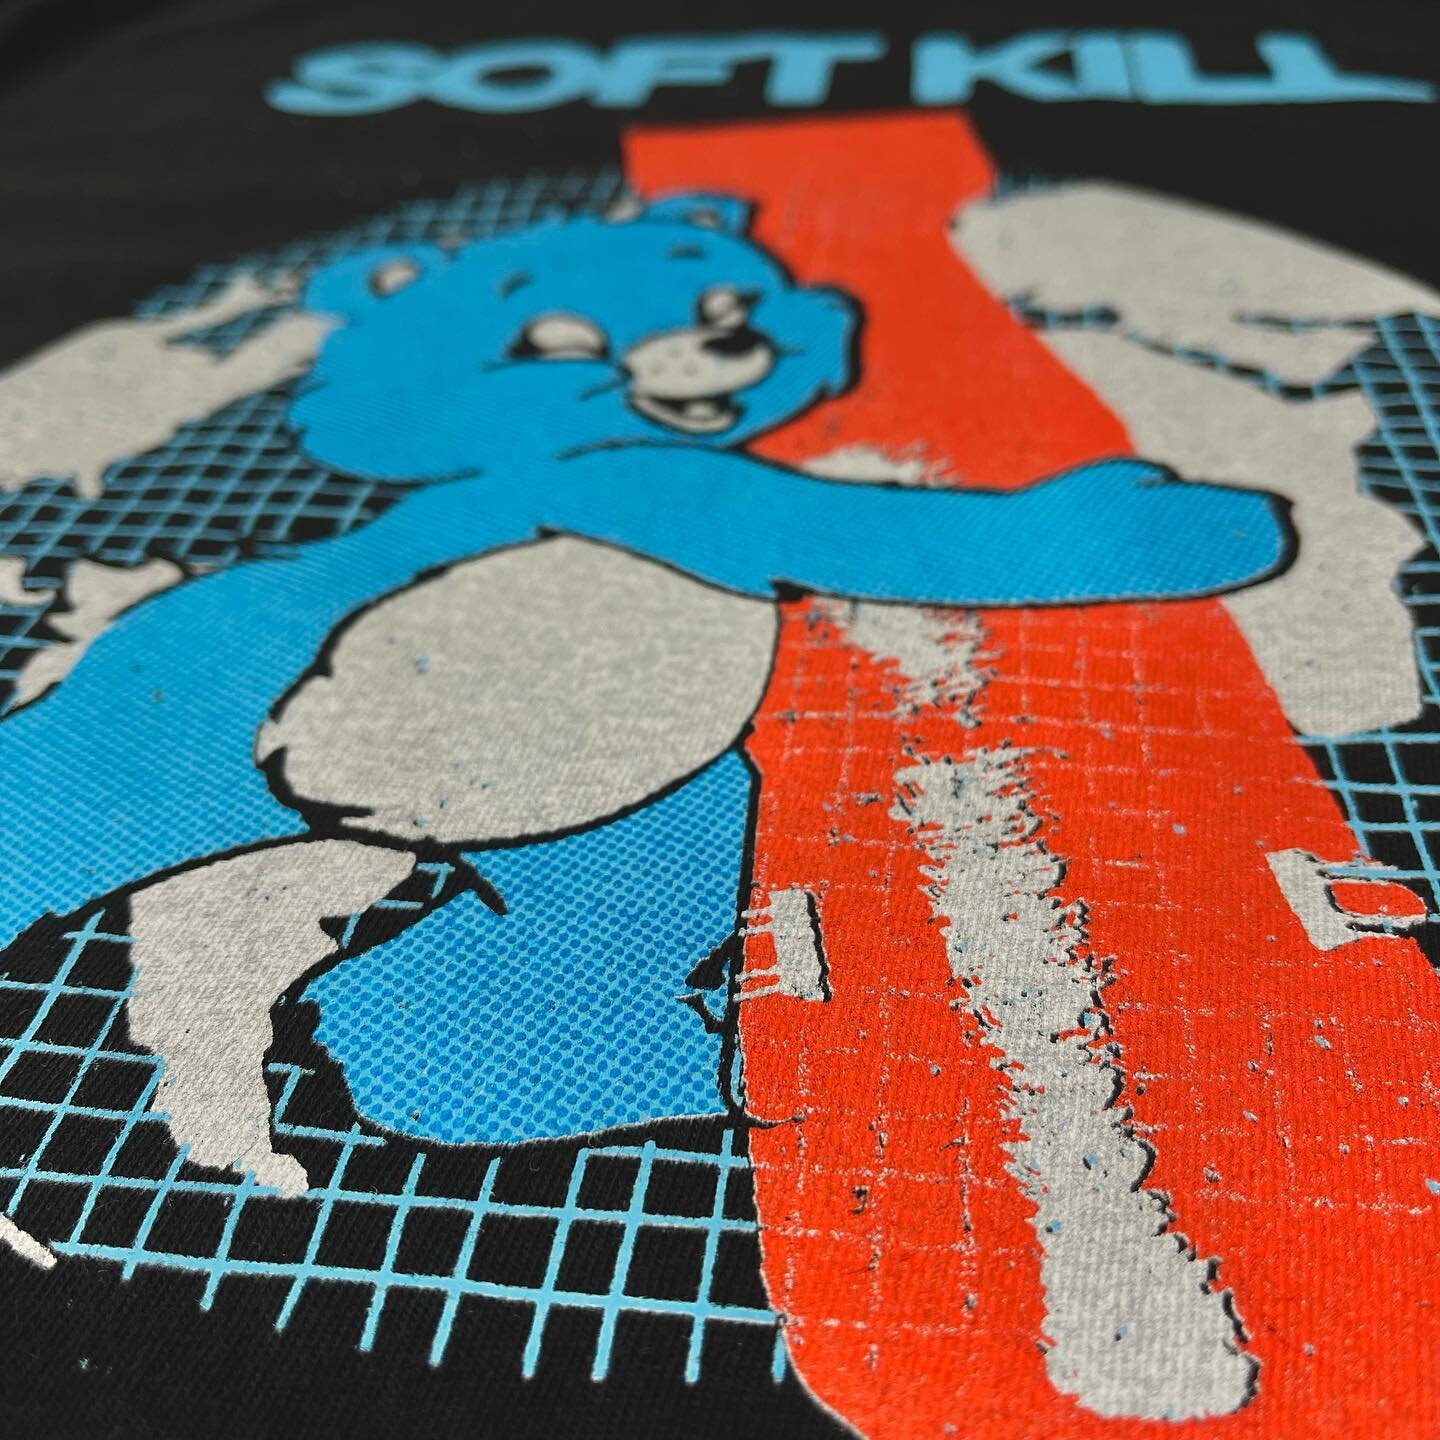 💣🐻🌎on black @comfort_colors  tees for @softkillpdx 

💥🏠💥

#explodinghouseprinting #softkillpdx #softkill #chicago #chicagoscreenprinting #chicagobands #comfortcolors #mettaworldpeace